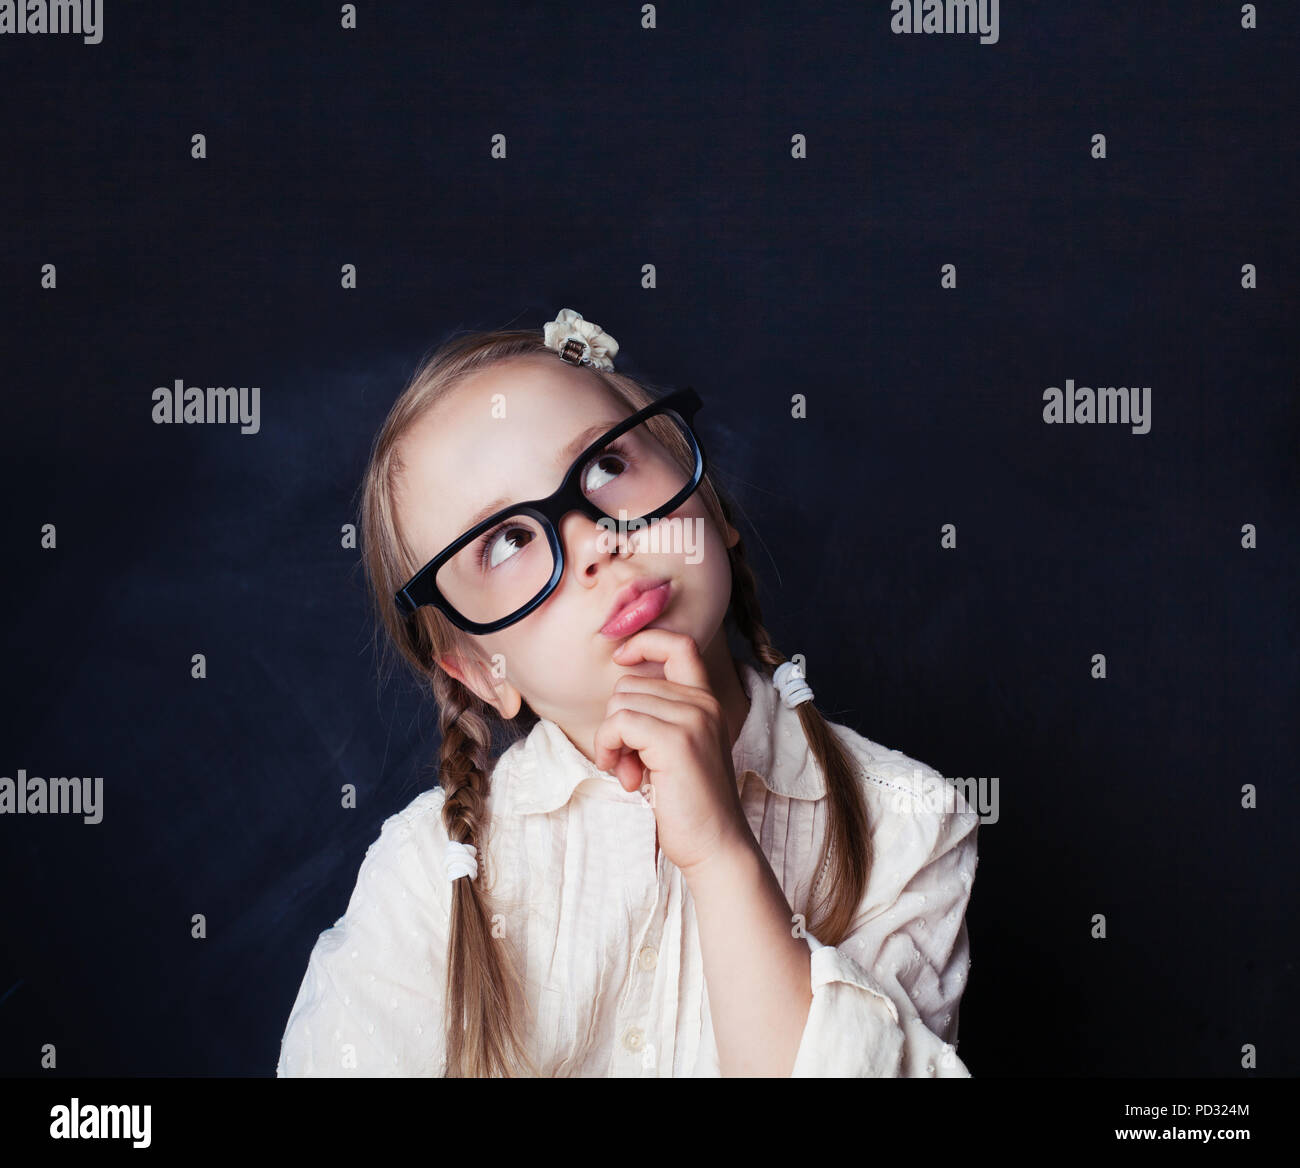 Сurious little girl thinking on empty chalk board background with copy space. Child back to school, kid creativity and brainstorming concept Stock Photo